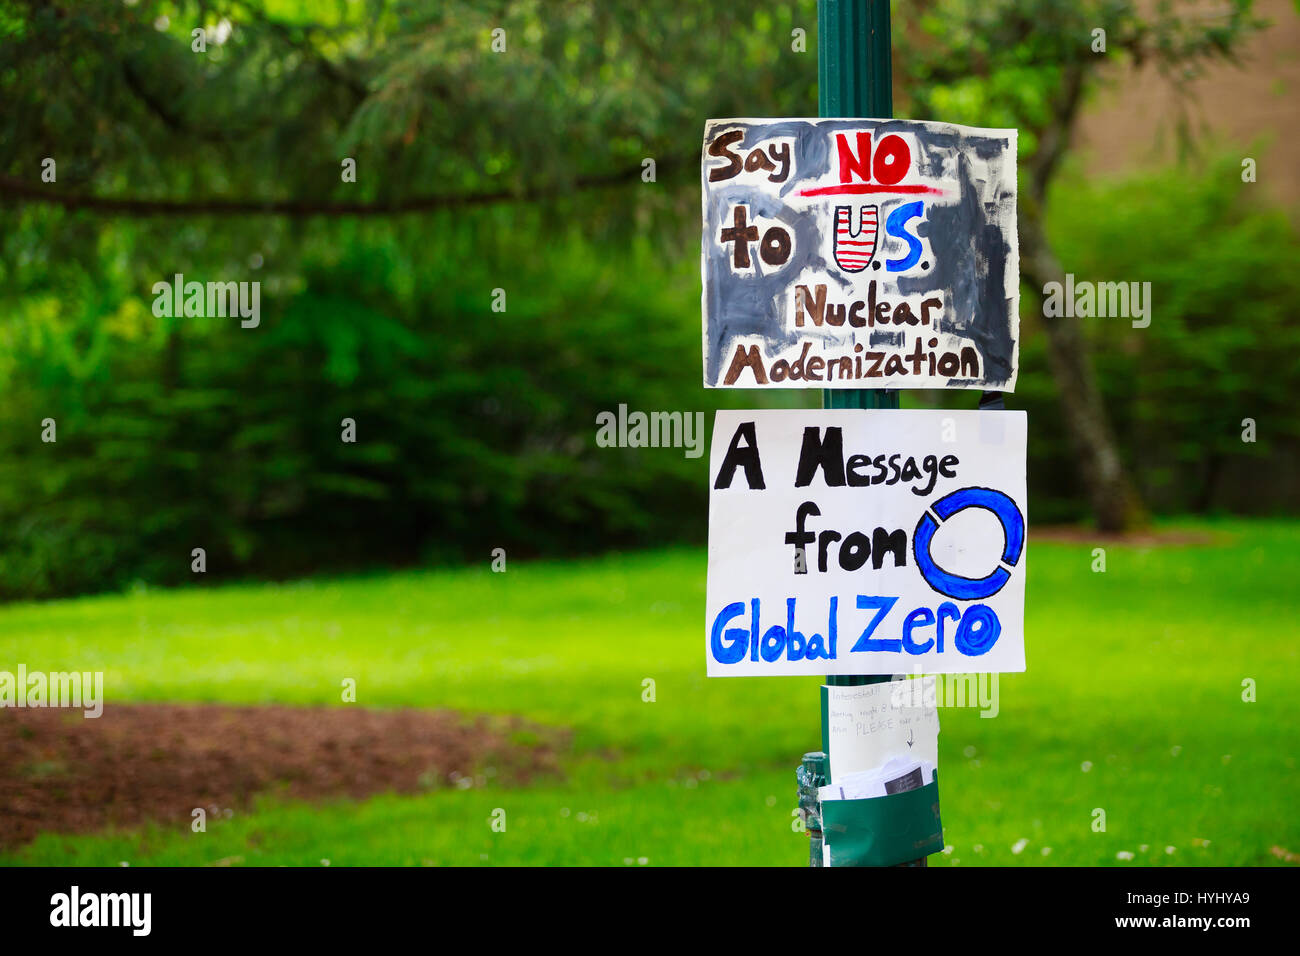 EUGENE, OR - MAY 9, 2015: Protest sign says no to U.S. nuclear modernization, a message from Global Zero group on the University of Oregon campus in E Stock Photo